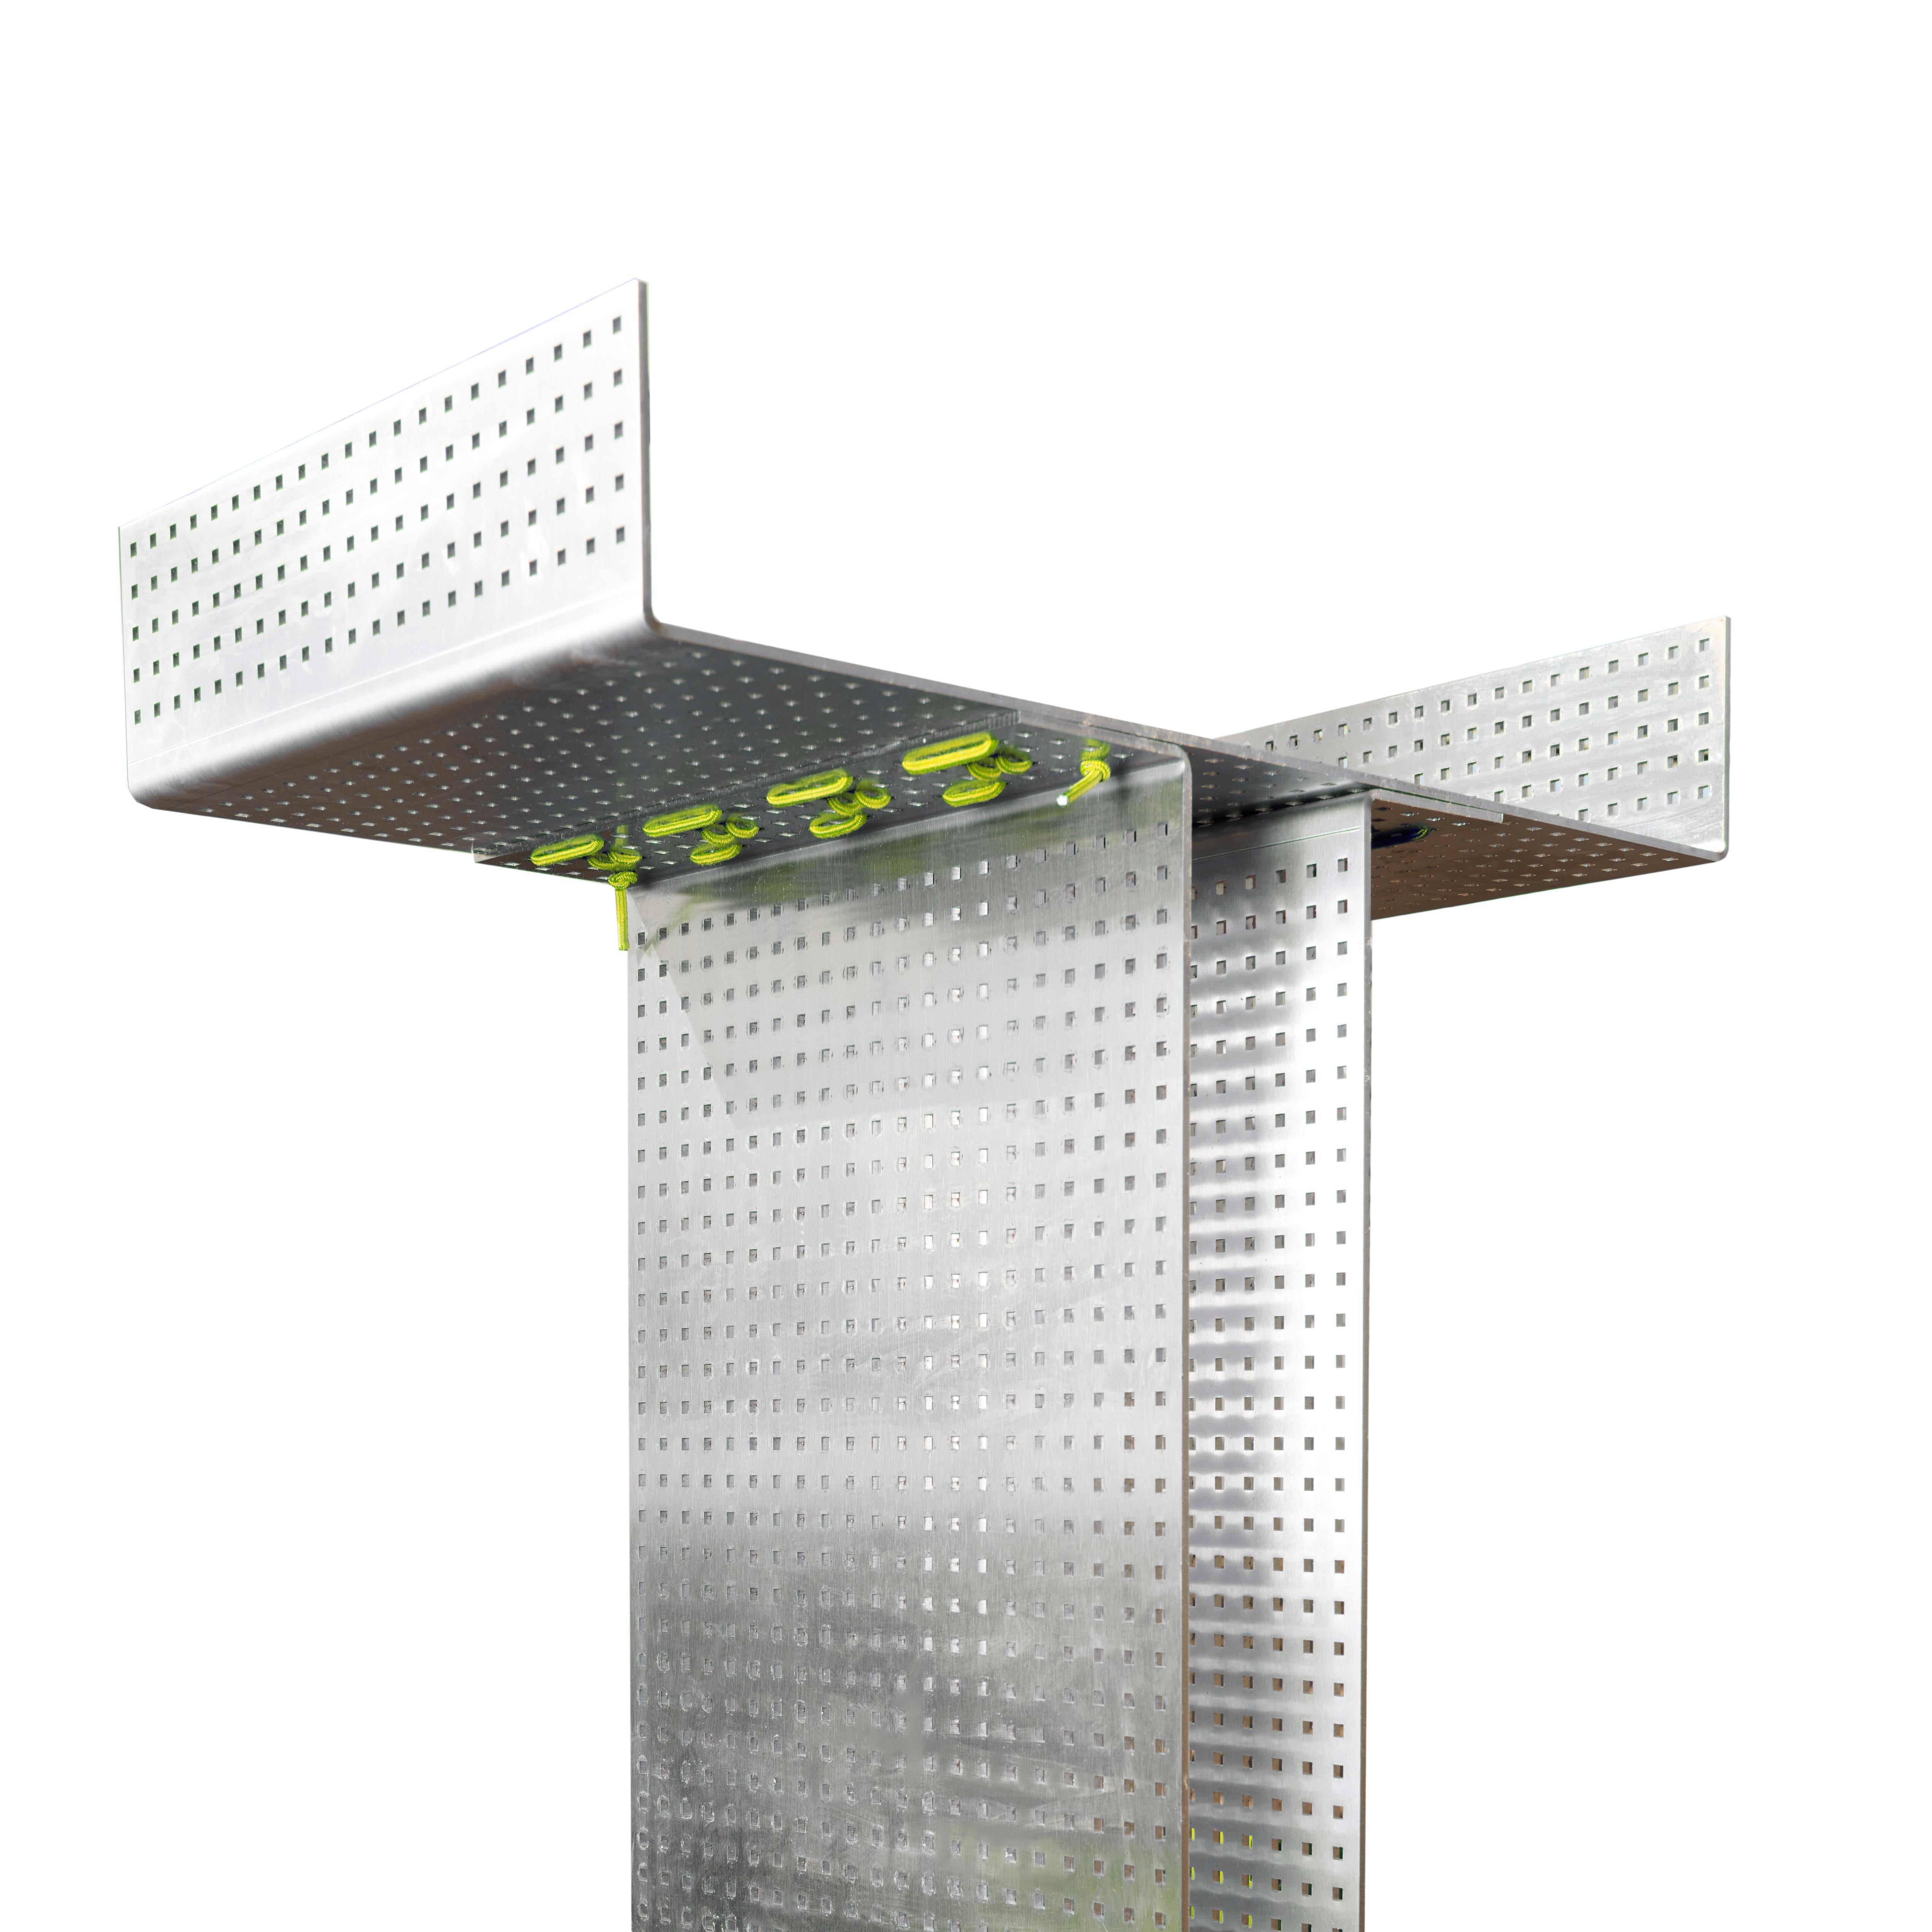 Stainless steel coffee table with green strings.1416
a piece of furniture that is defined by its user. Lina tries to find the essence of itself. A monolith made up of 4 slabs sewn together becomes a seat or a small table or they can be stacked and